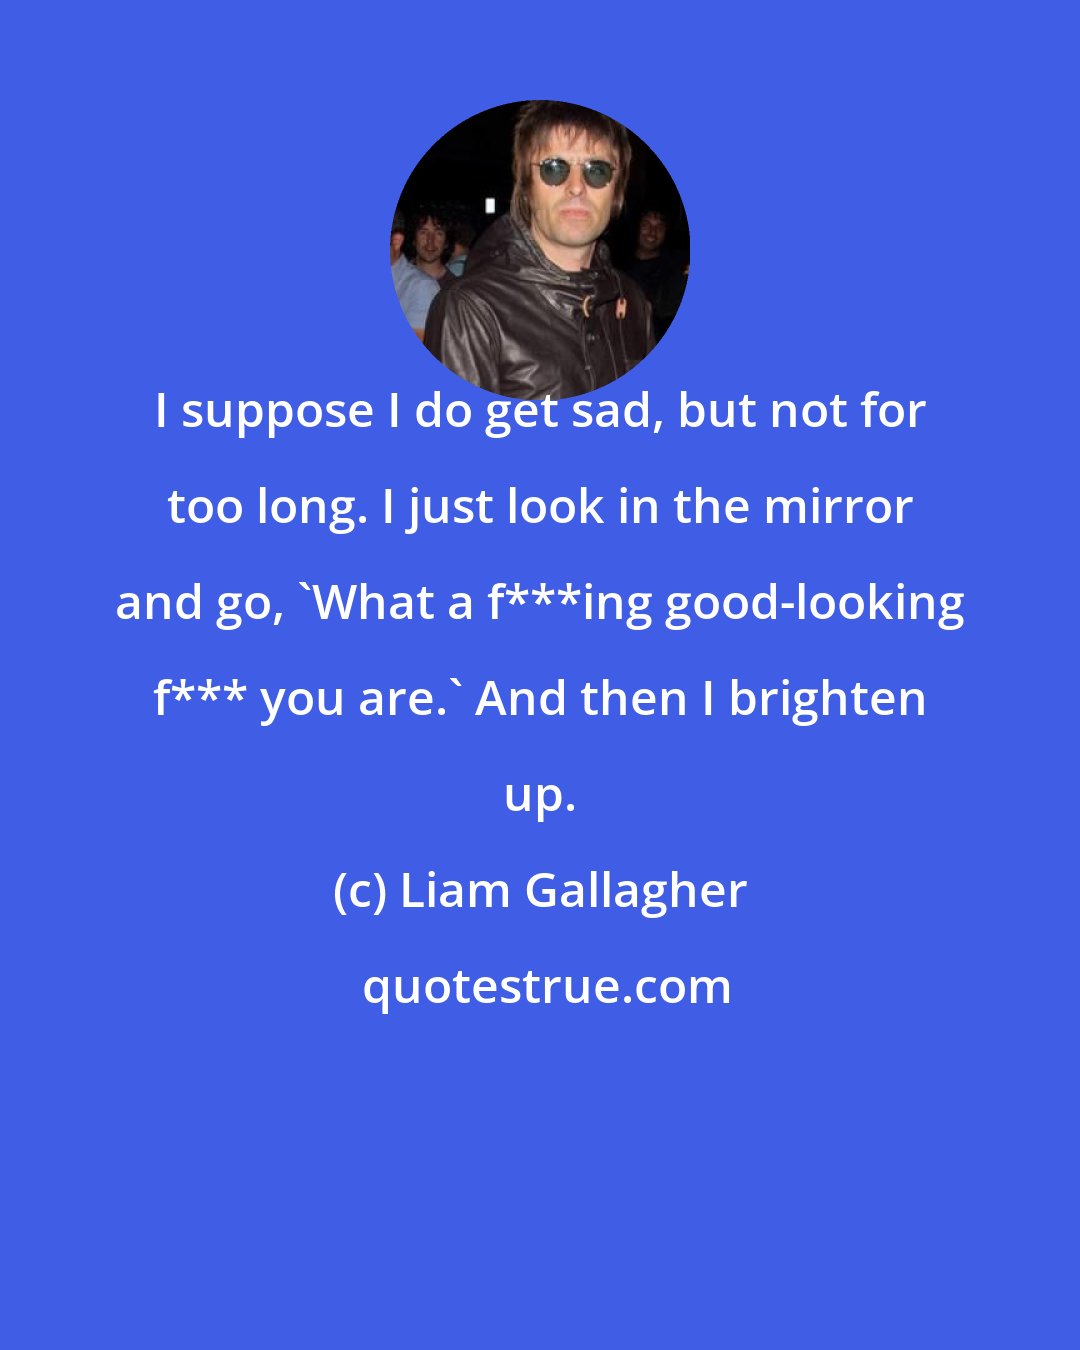 Liam Gallagher: I suppose I do get sad, but not for too long. I just look in the mirror and go, 'What a f***ing good-looking f*** you are.' And then I brighten up.